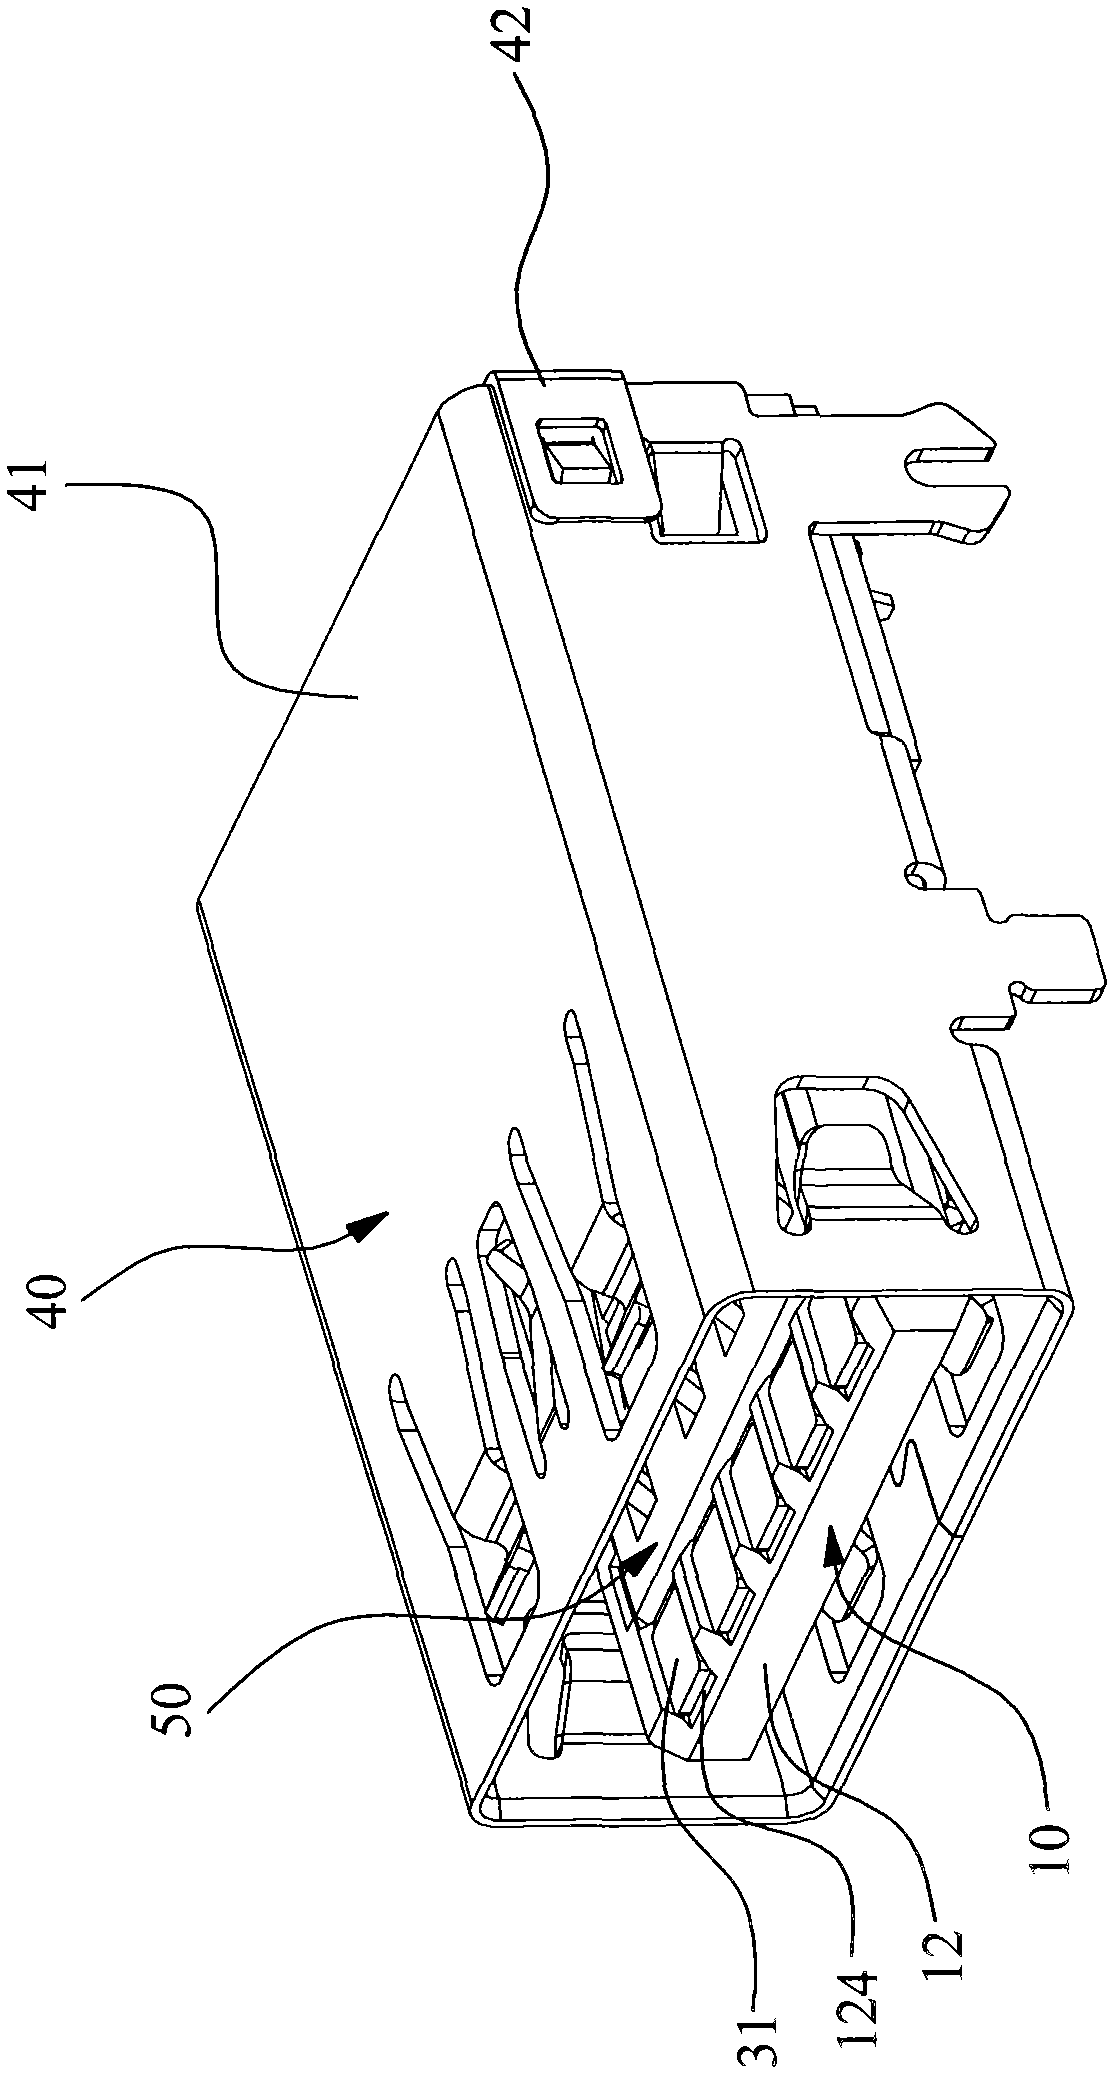 Electric connector and assembly method thereof